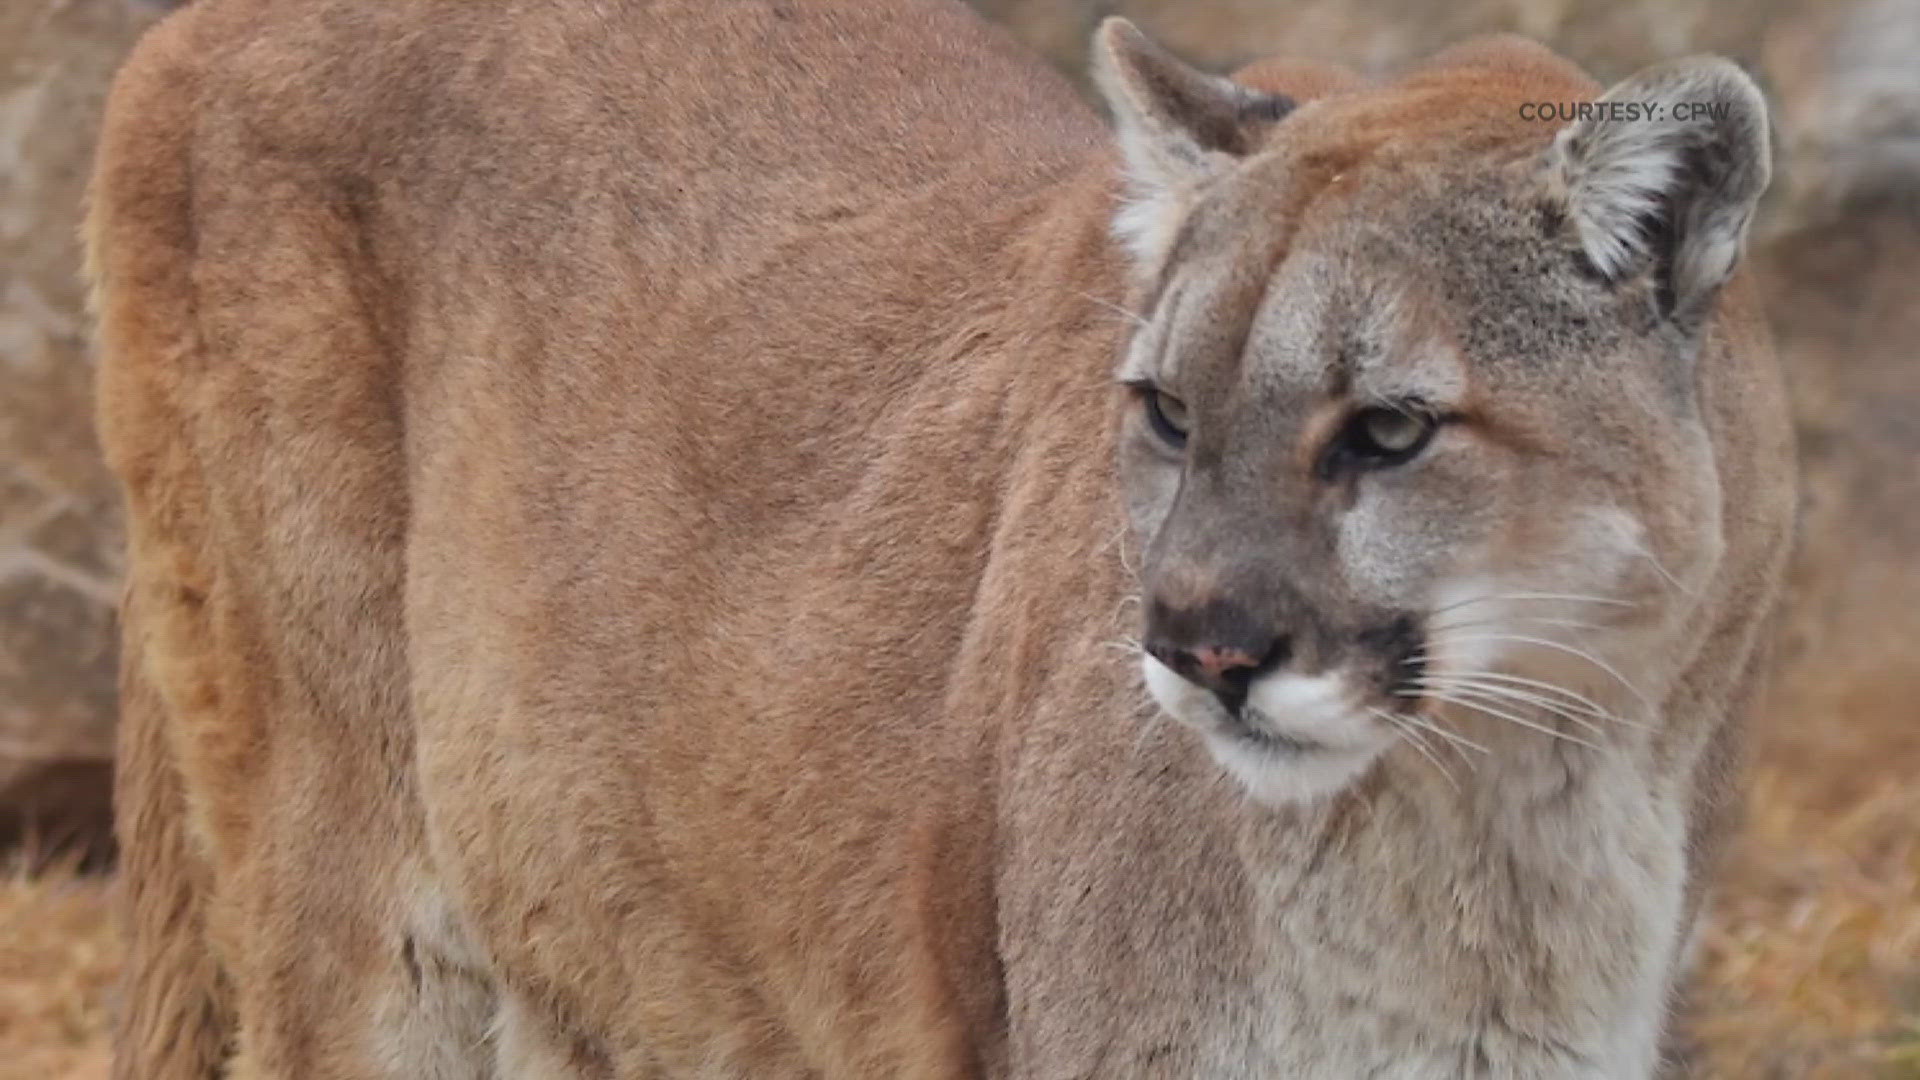 Colorado Parks and Wildlife wants to reduce conflicts between people and mountain lions without reducing the animal population.